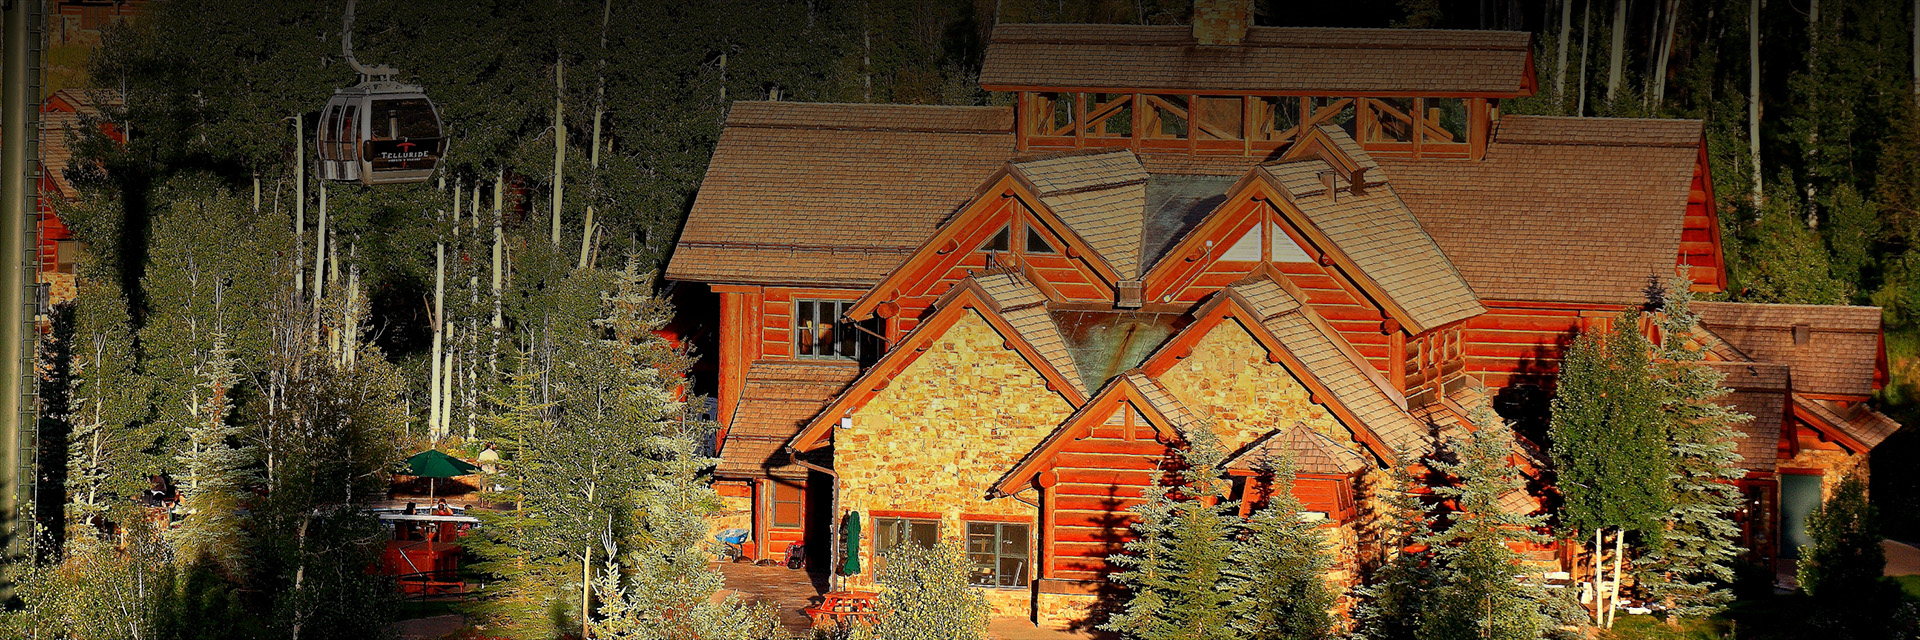 the exterior of the lodge with stone and red wood at sunset